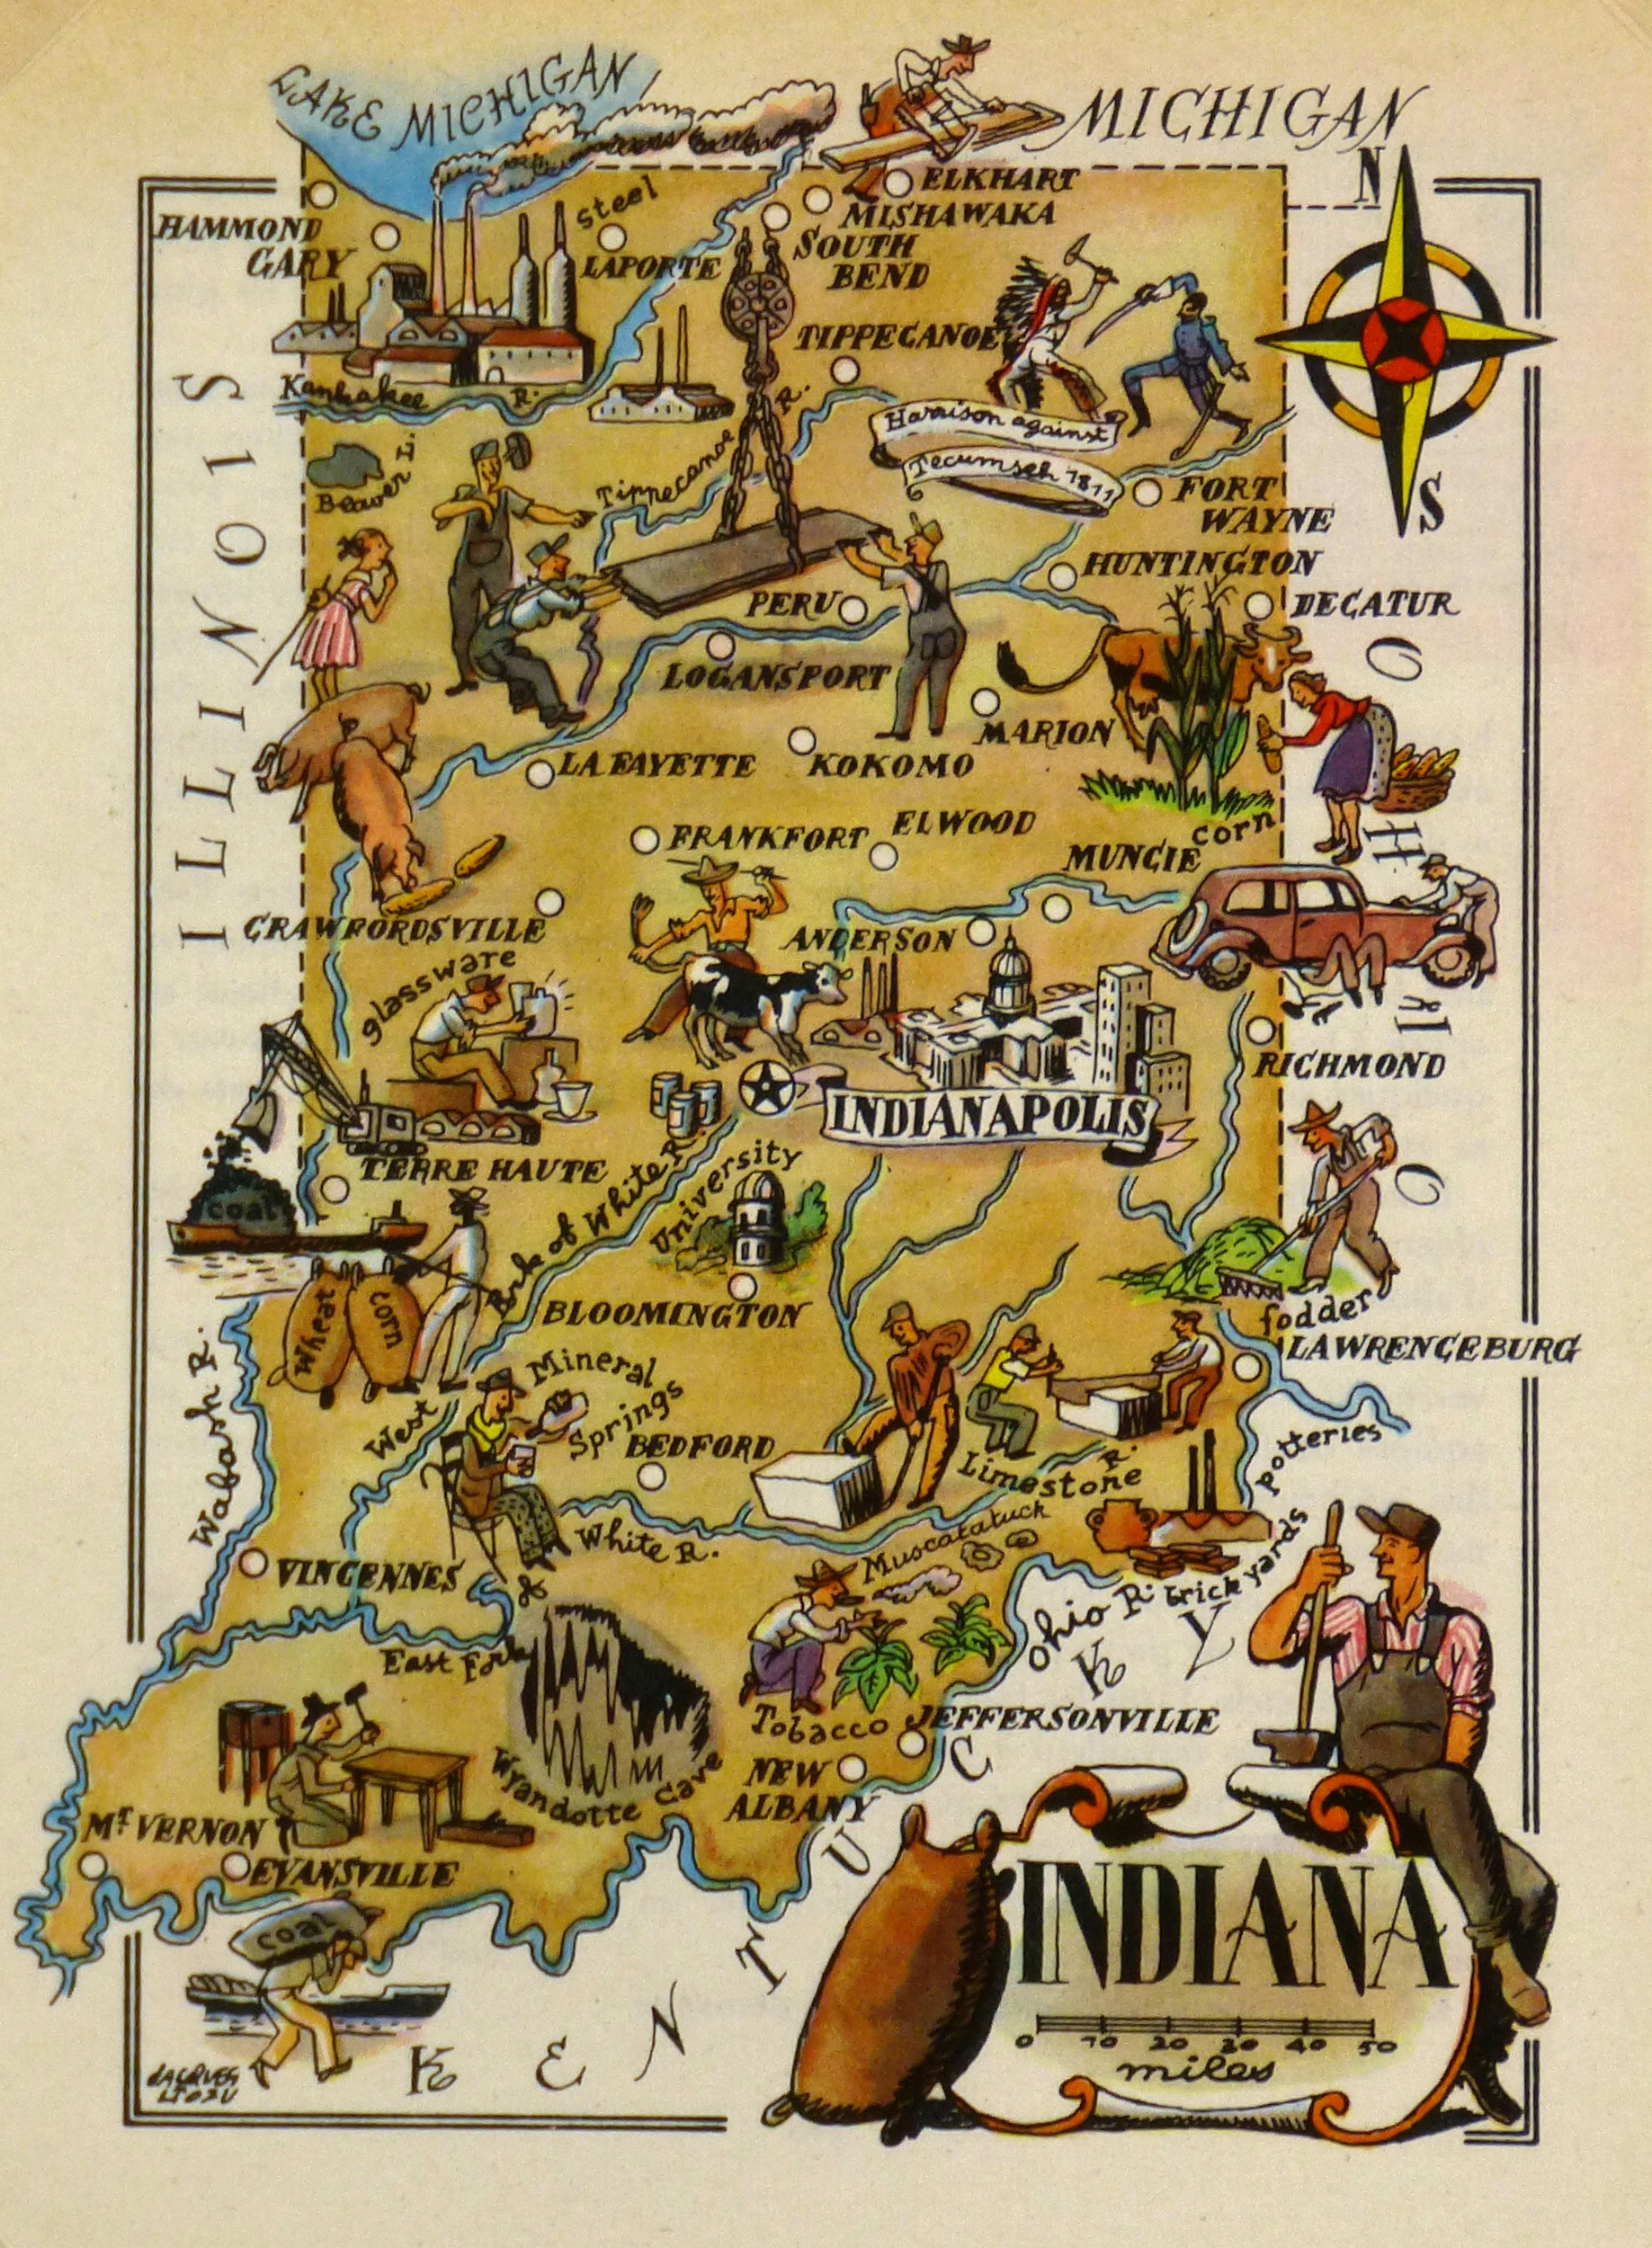 Indiana Pictorial Map, 1946